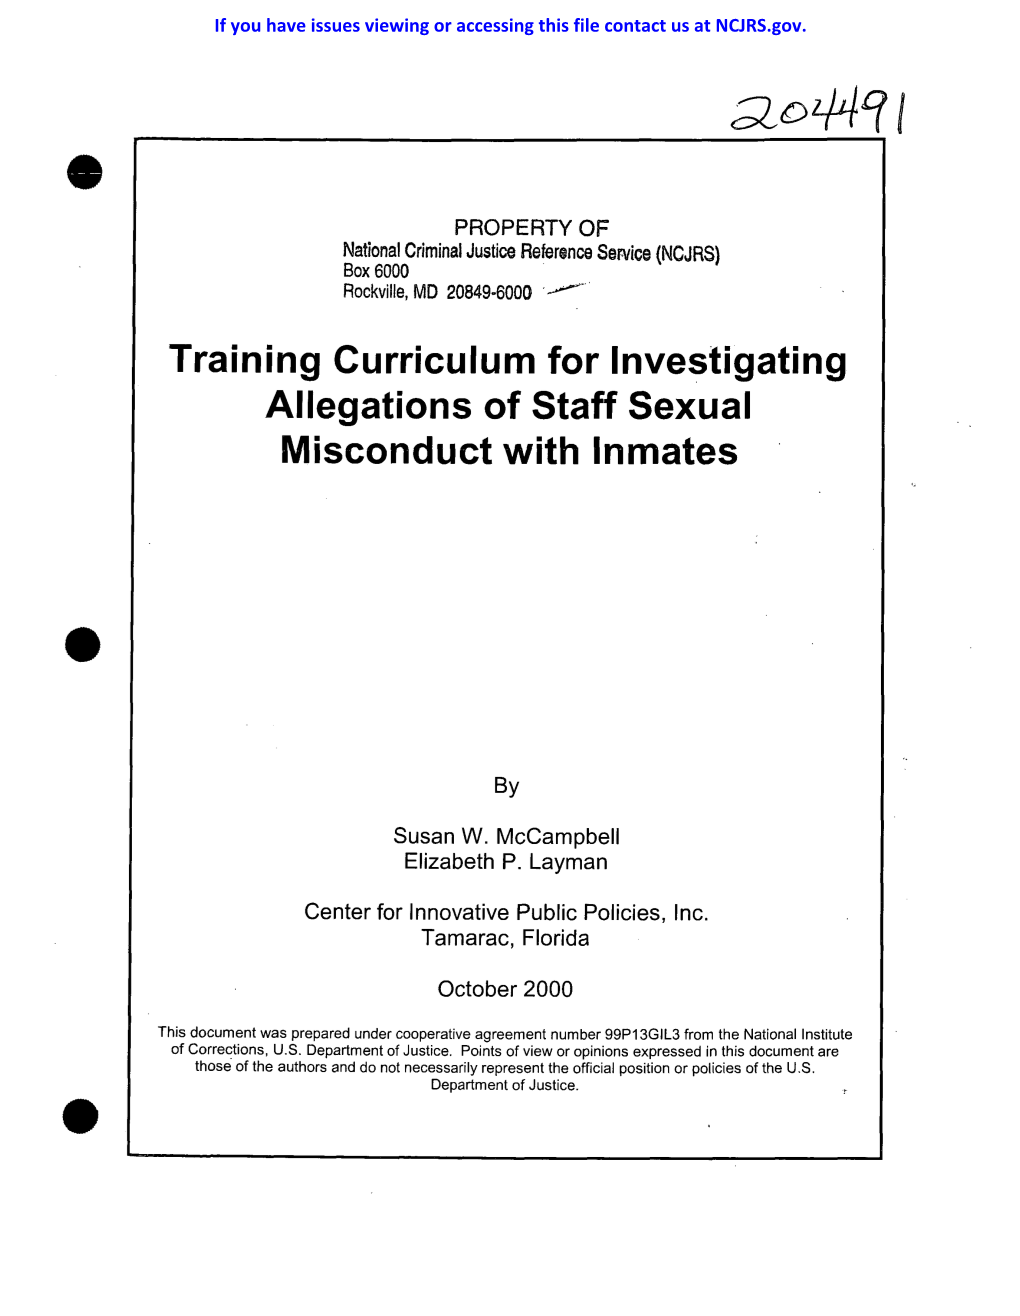 Training Curriculum for Investigating Allegations of Staff Sexual Misconduct with Inmates